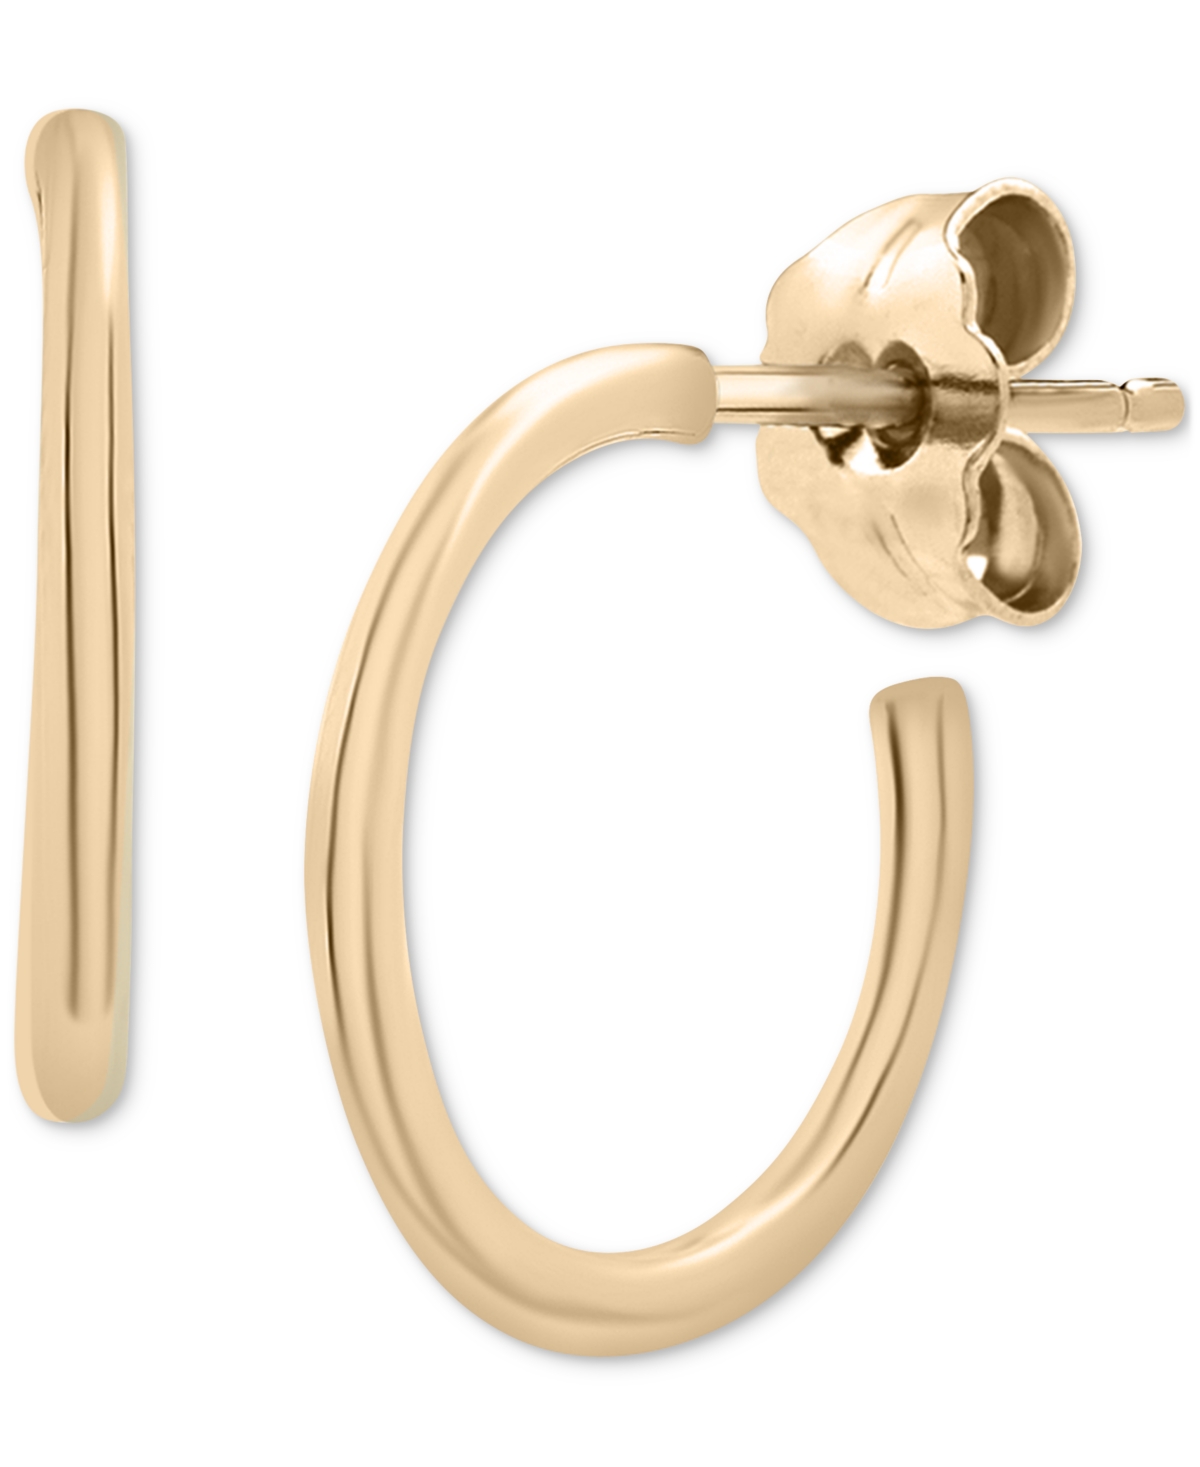 Polished Tube Small Hoop Earrings in Gold Vermeil, Created for Macy's - Gold Vermeil